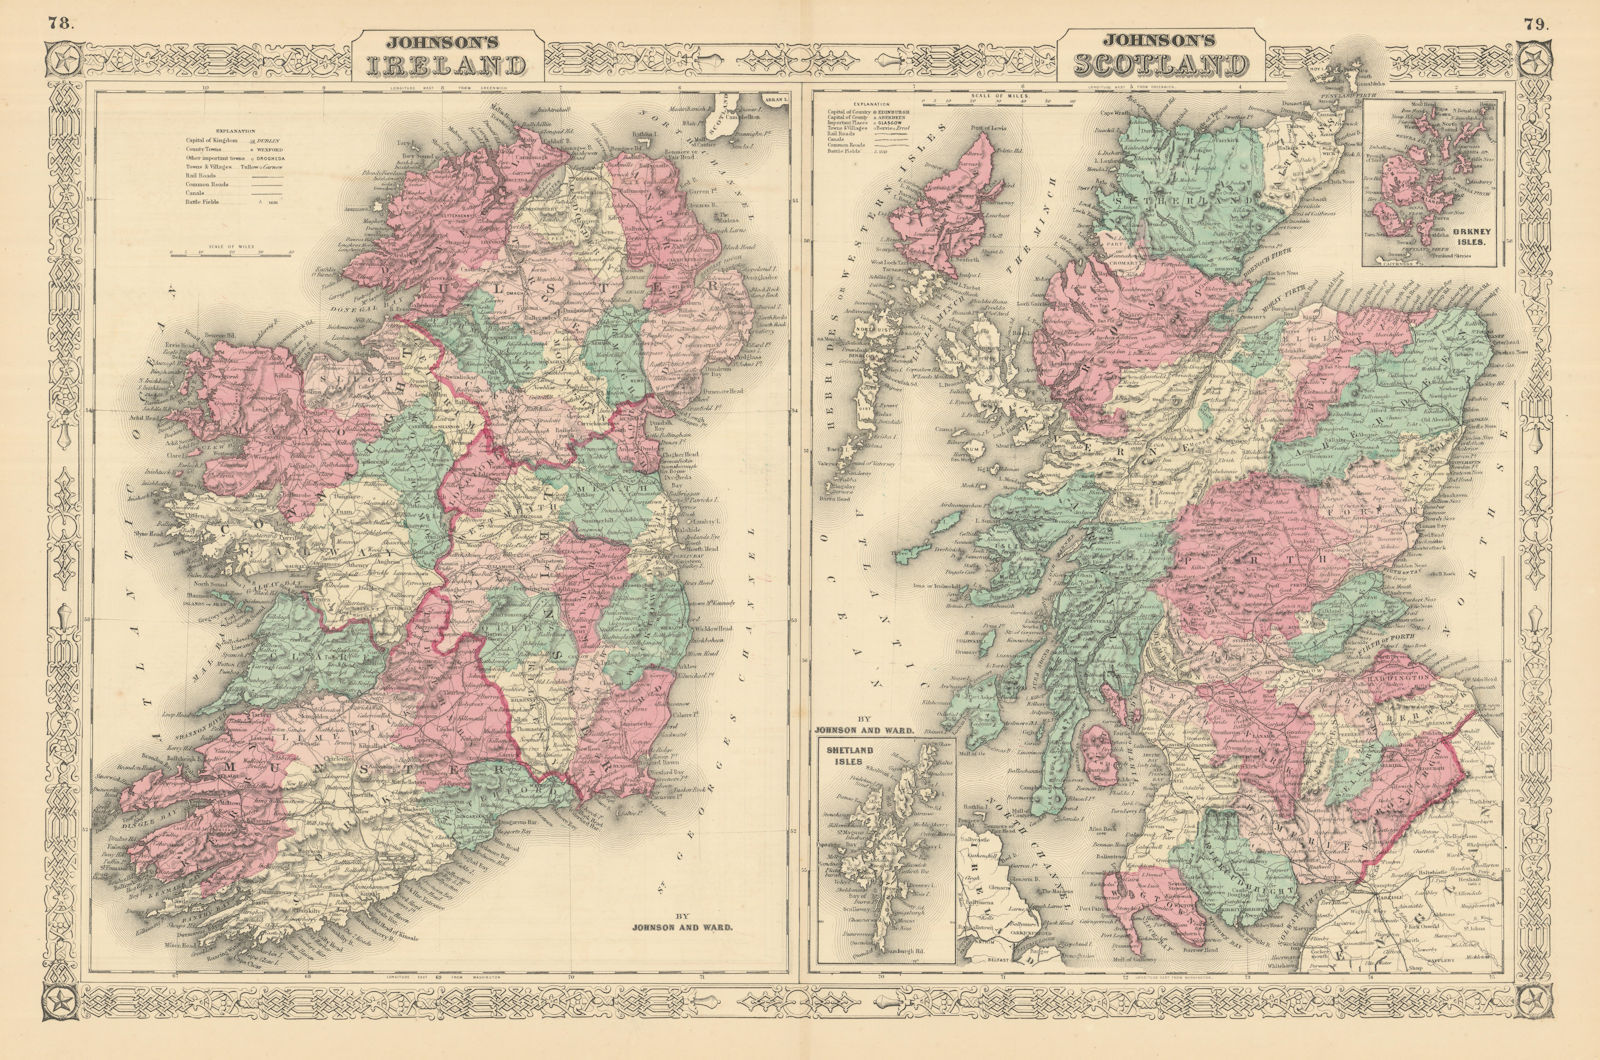 Associate Product Johnson's Ireland & Johnson's Scotland showing counties 1866 old antique map